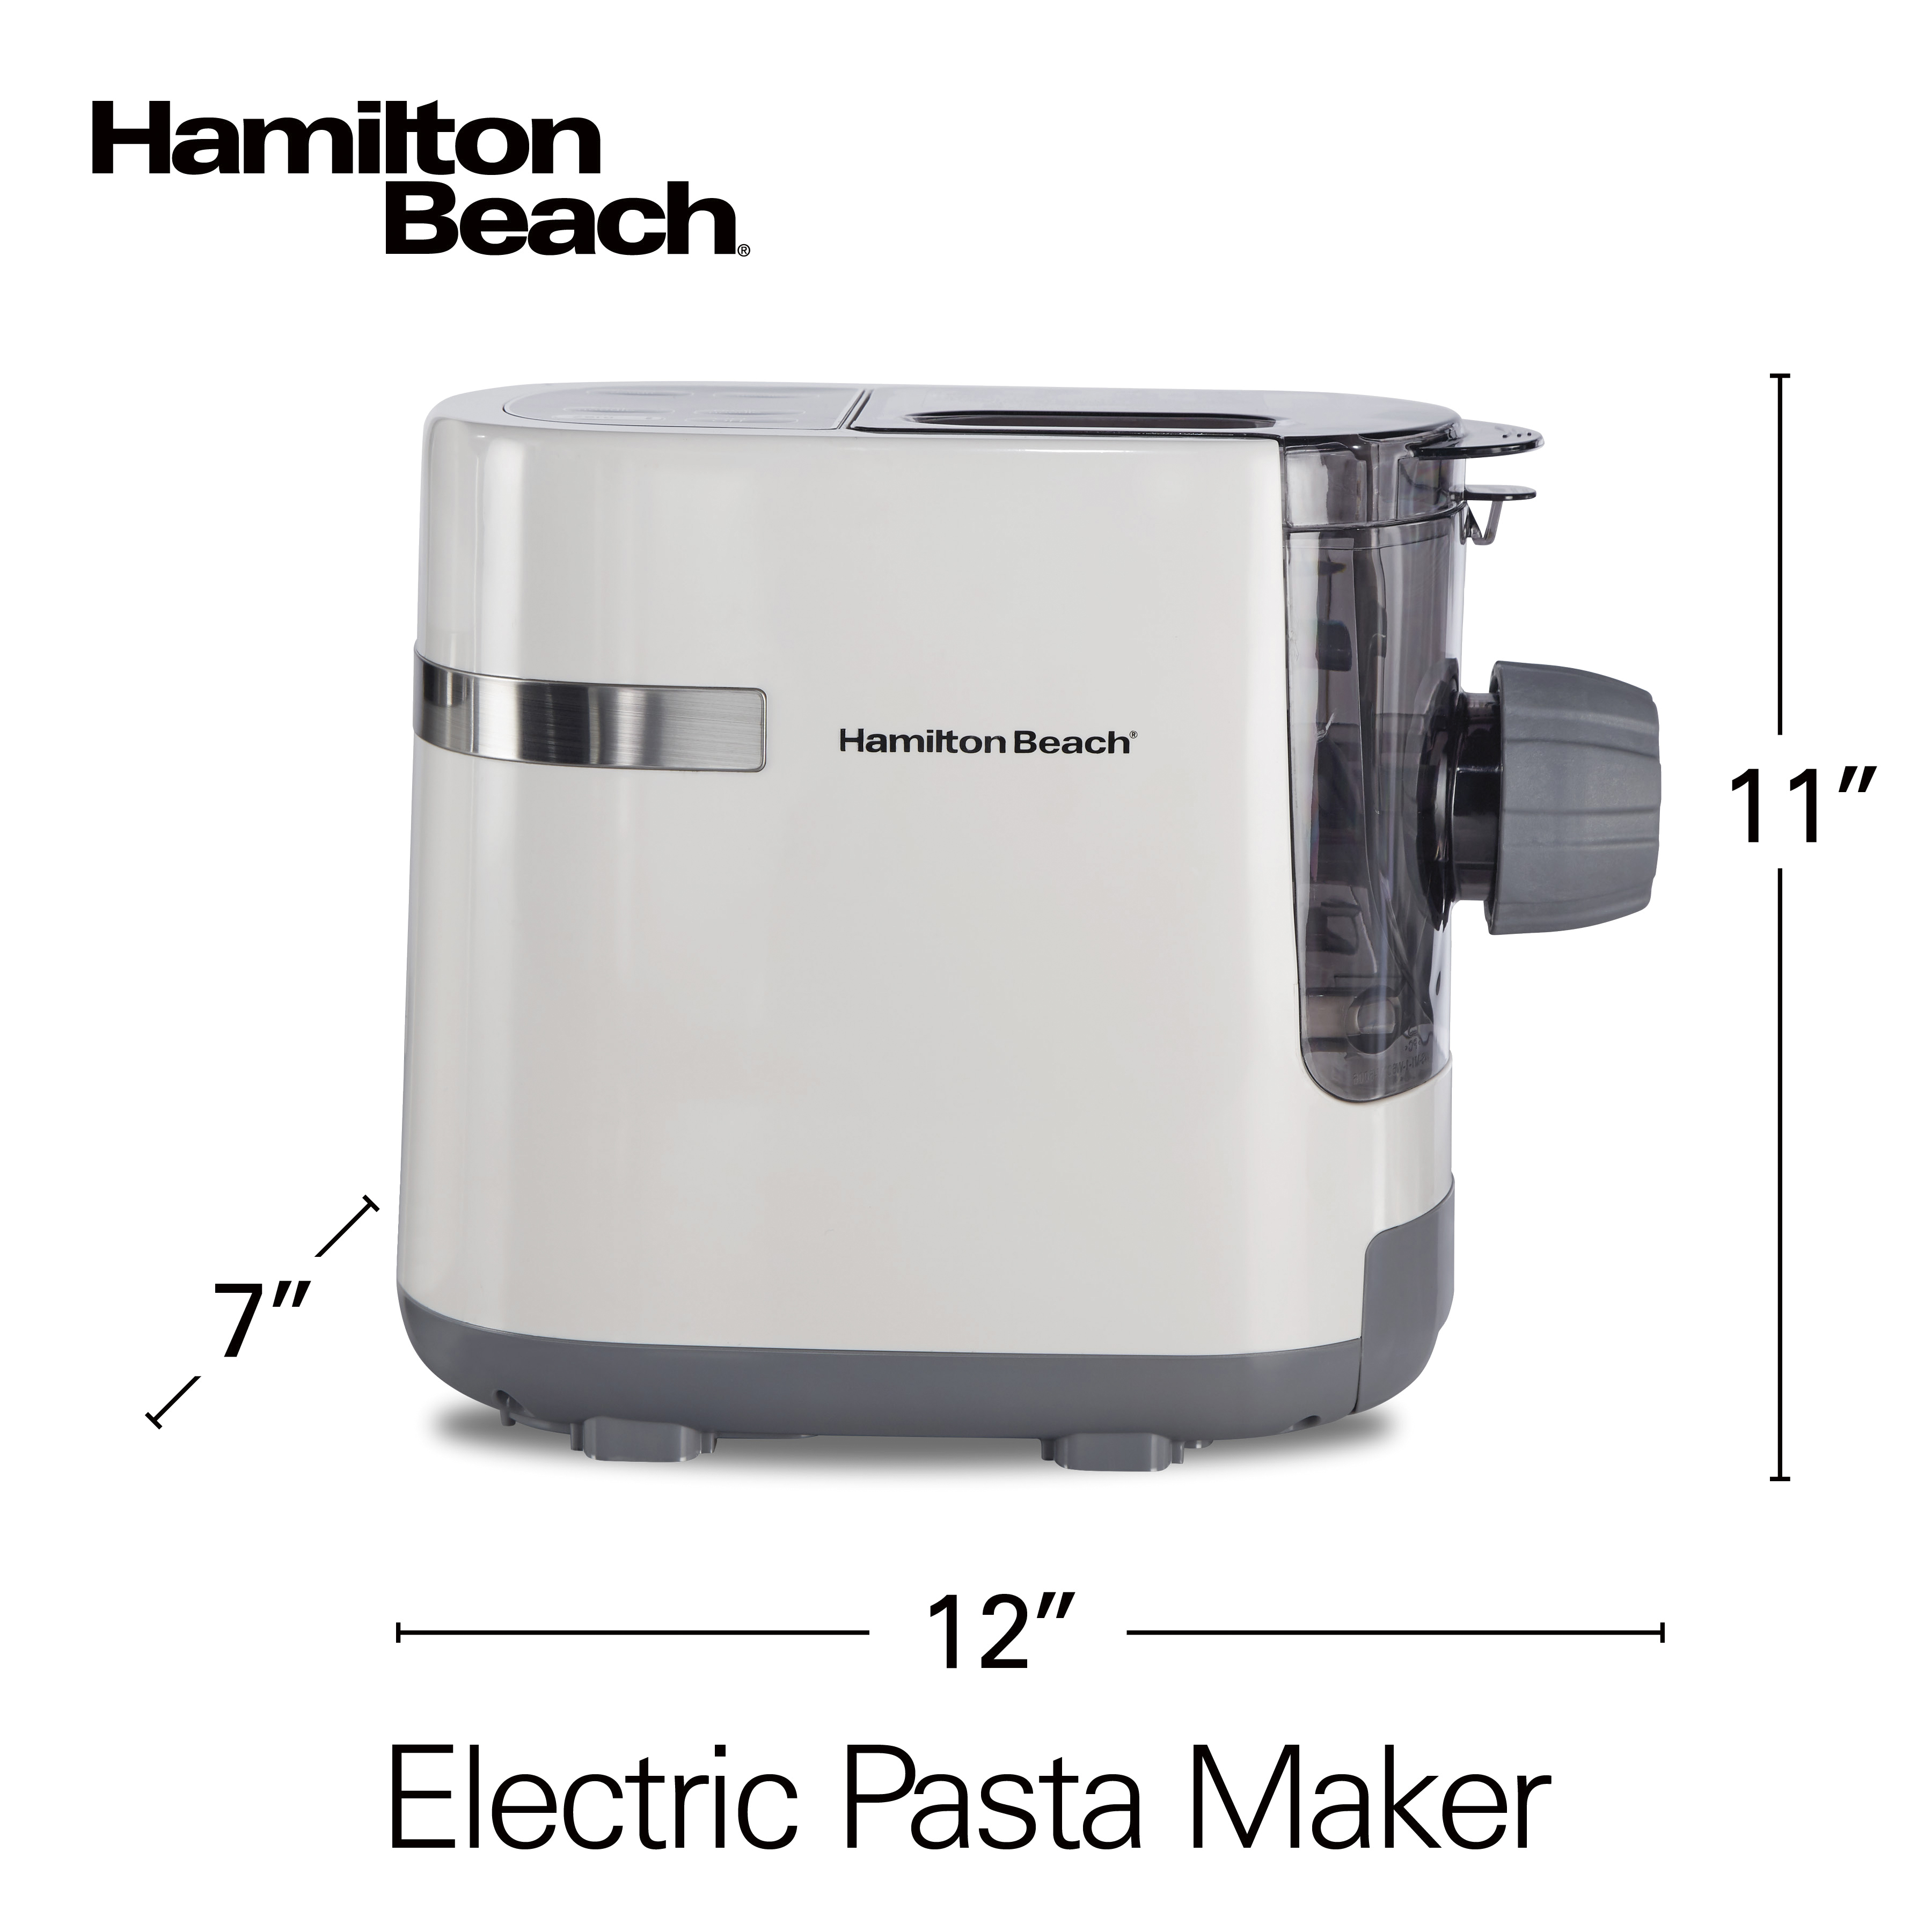 Hamilton Beach Electric Pasta and Noodle Maker Machine with 7 Molds for Spaghetti, Fettucine and more, White, 86650 - image 3 of 9